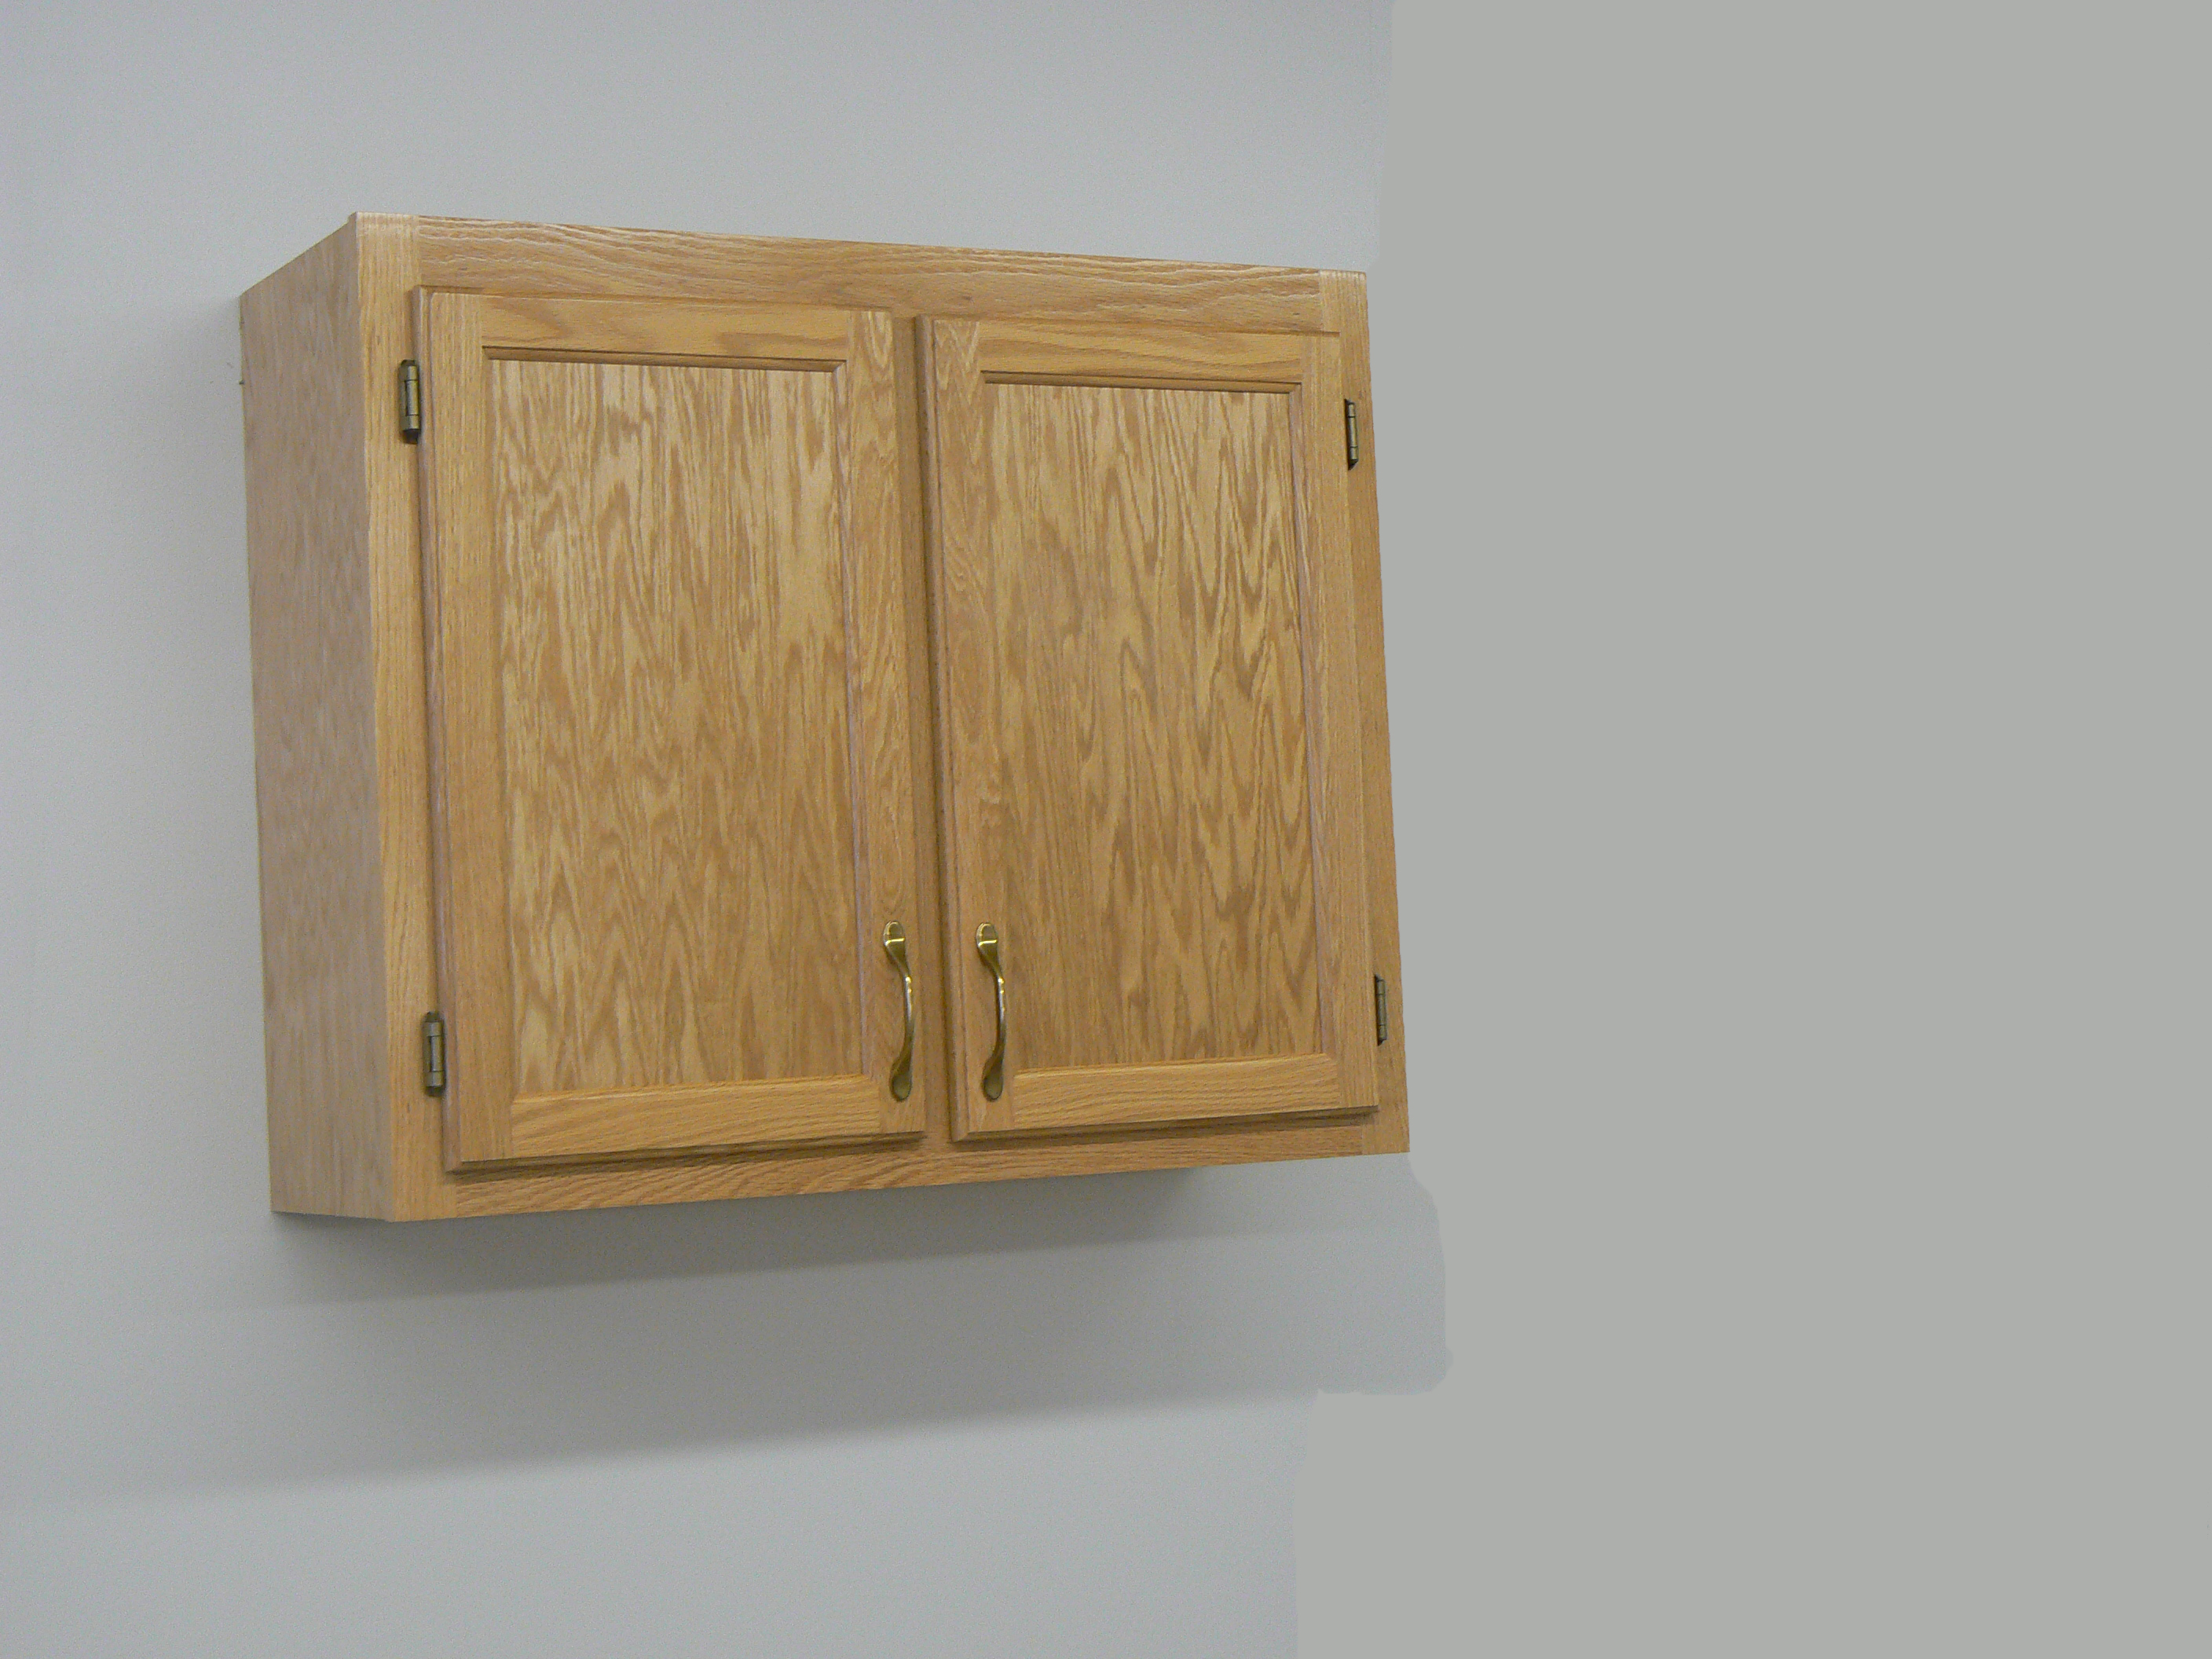 An example of a 27 x 32 inch upper cabinet.